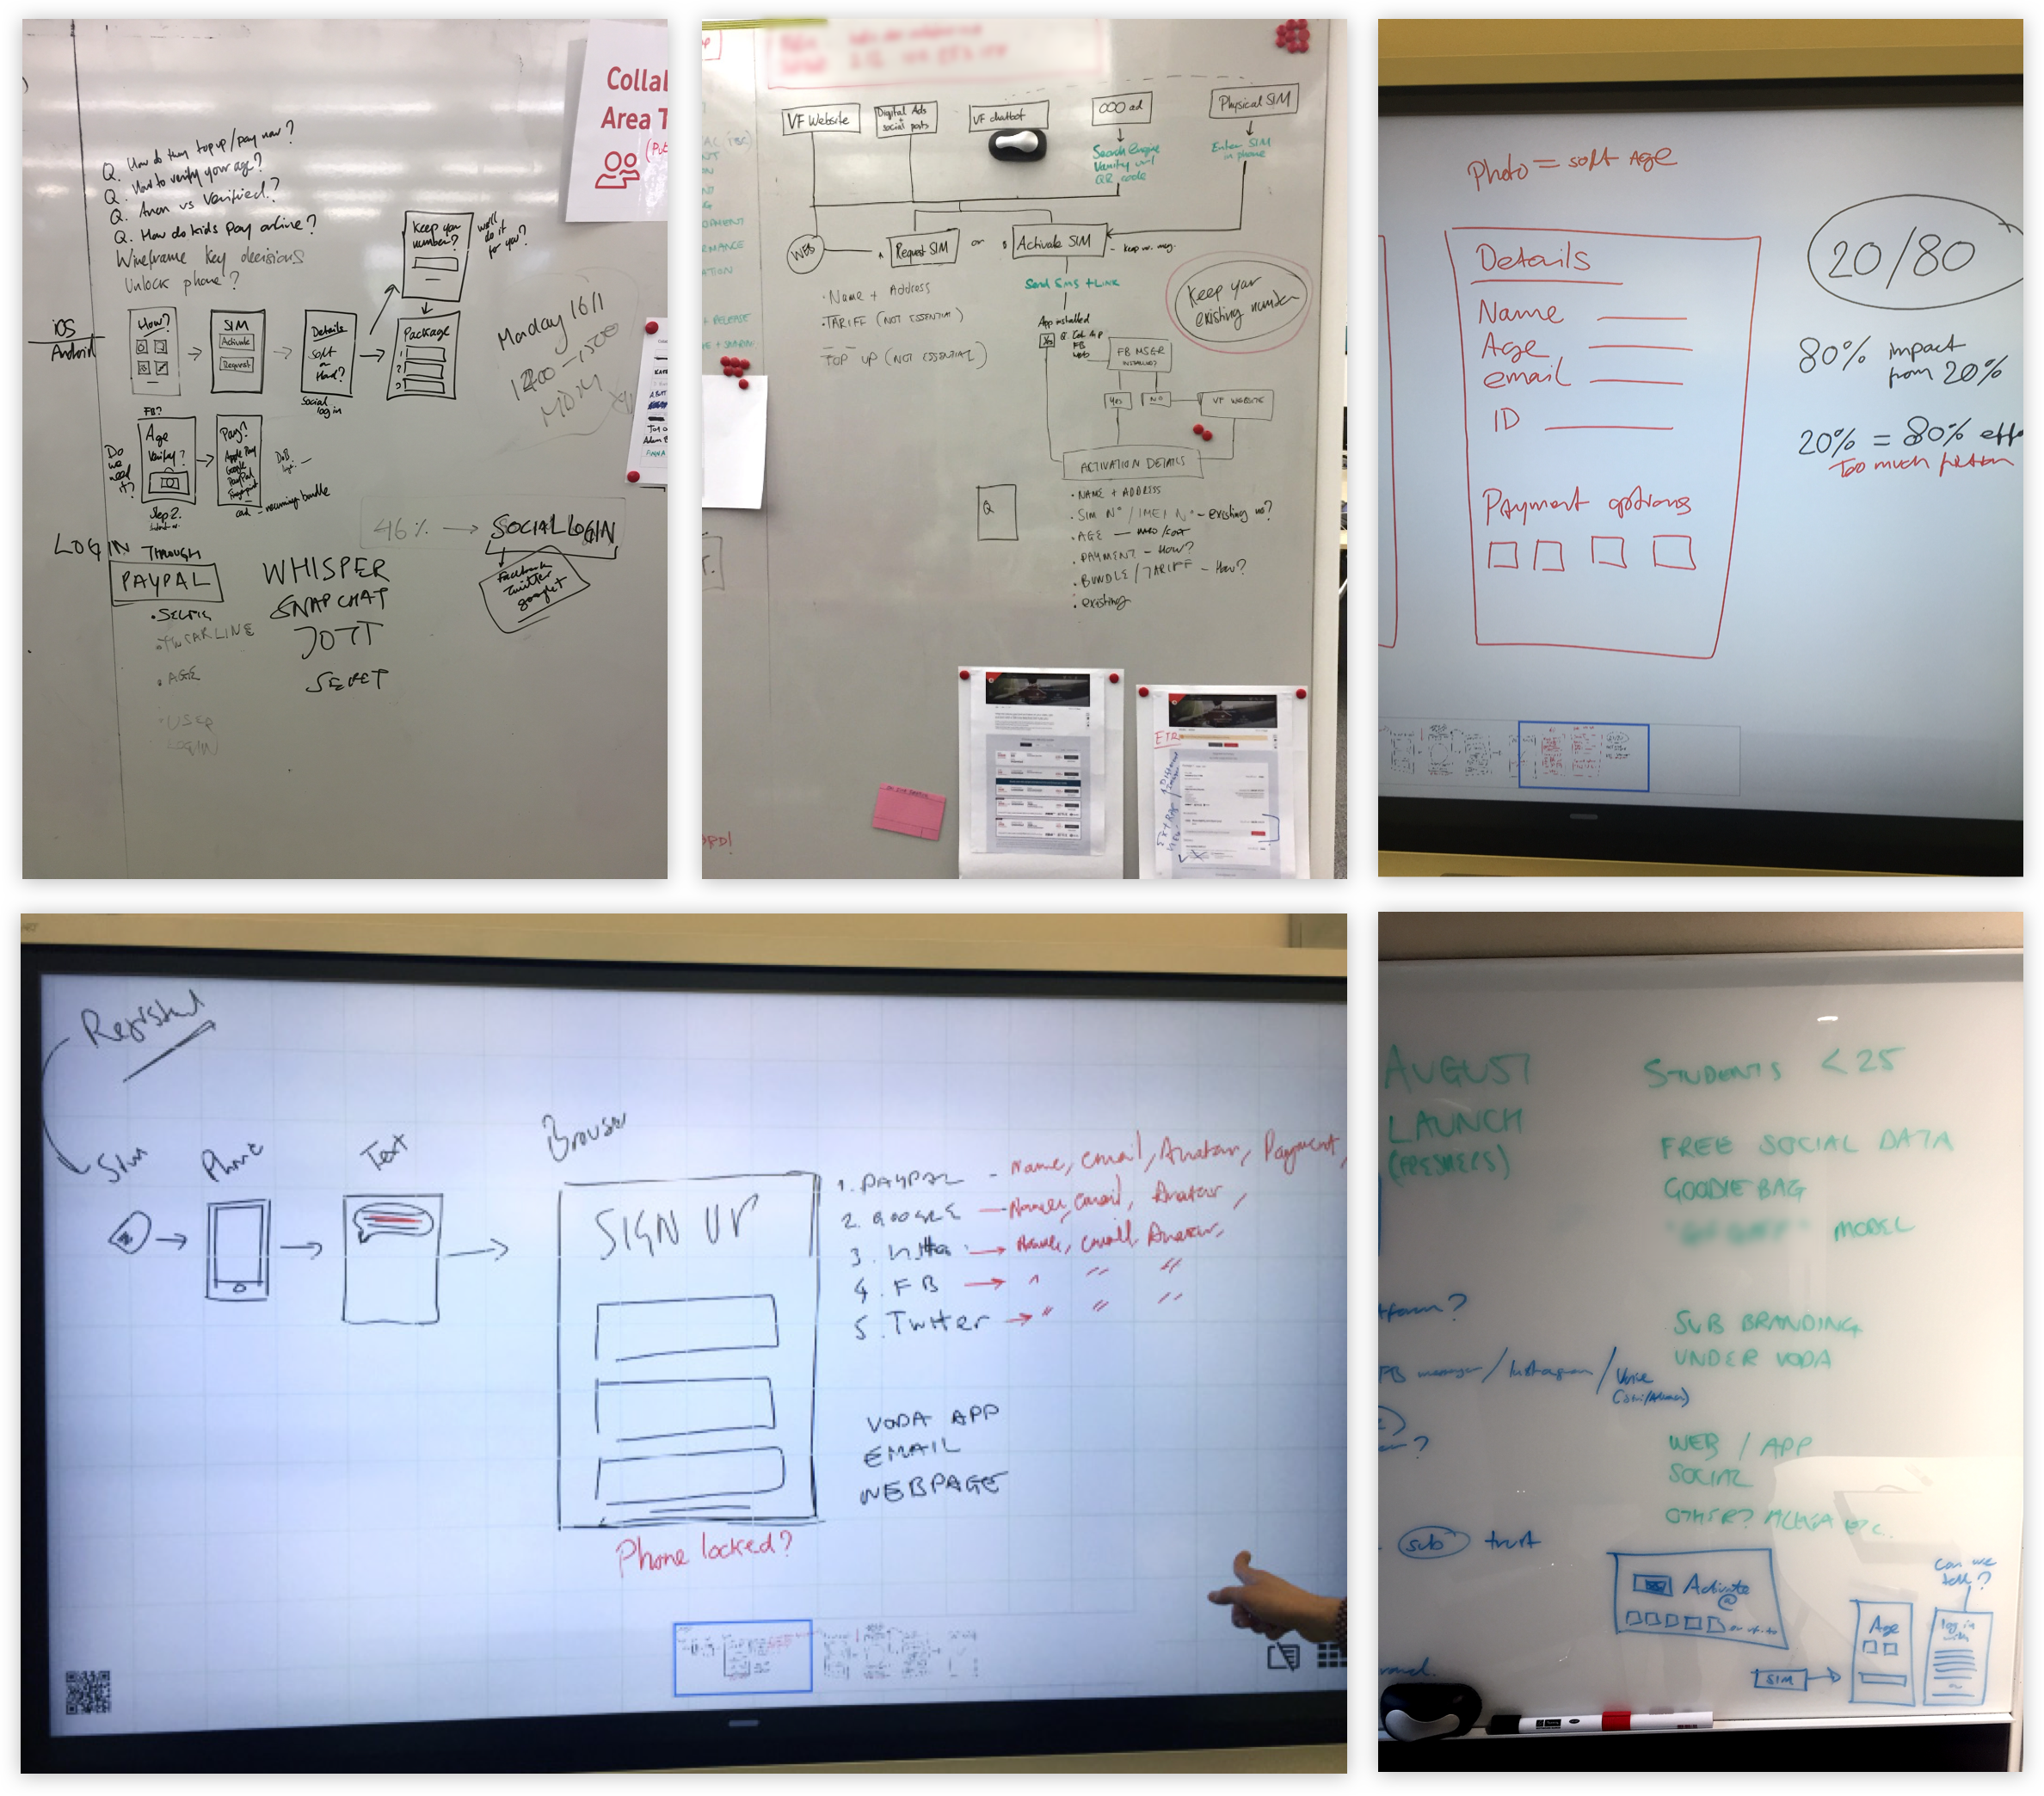 Photos of various workshops, showing sketches and notes on whiteboards